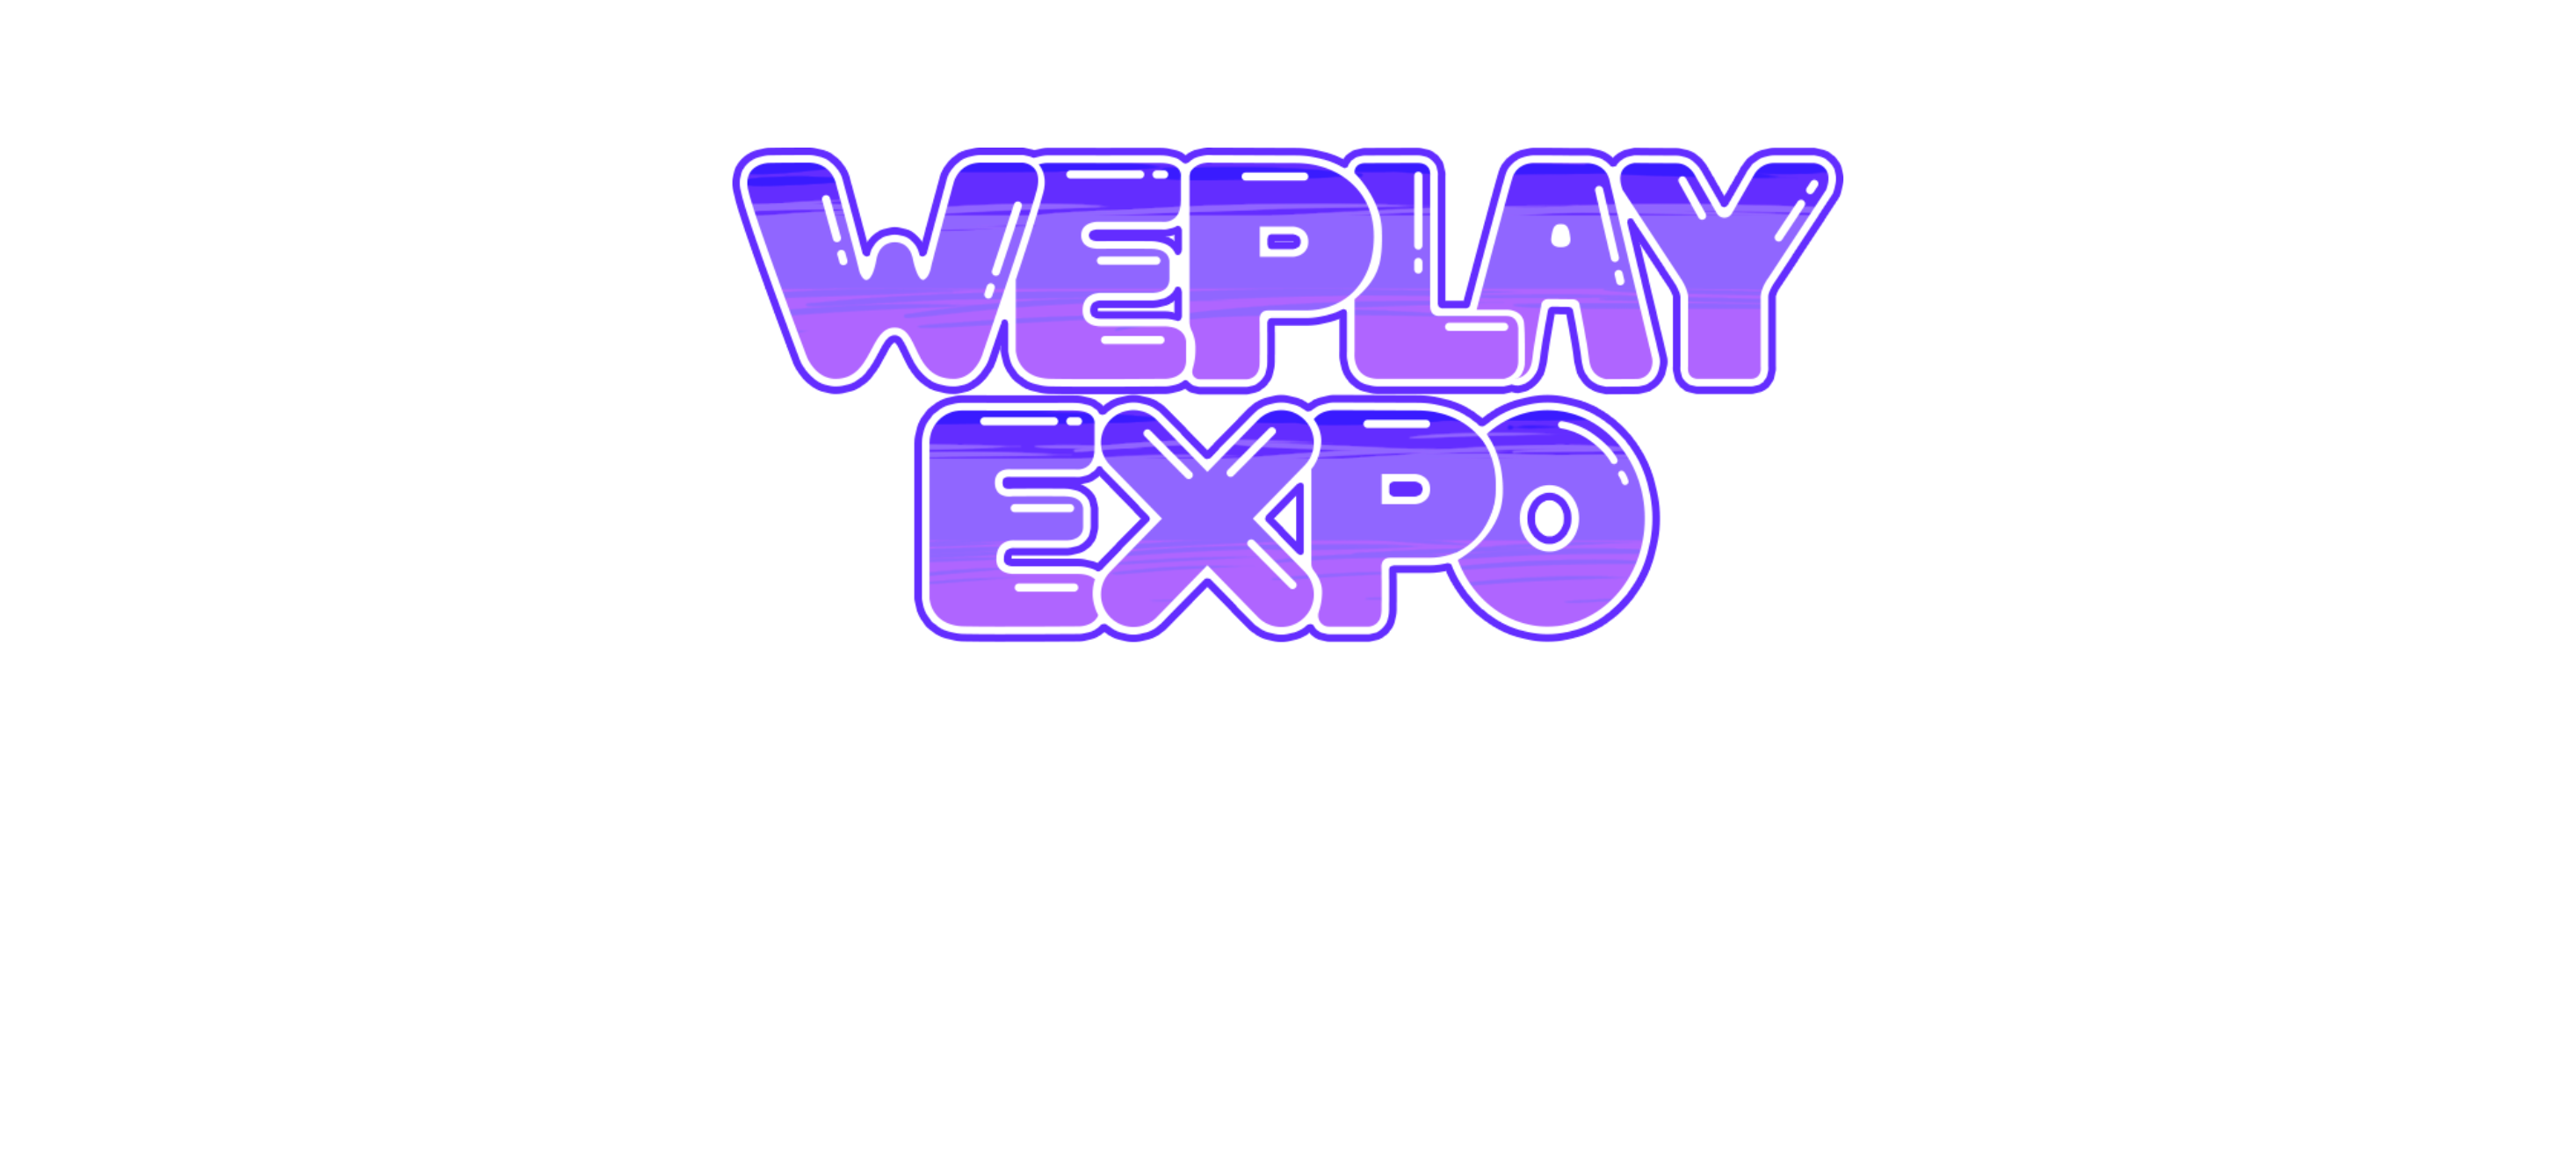 【WEPLAY EXPO】 《Official Selection》